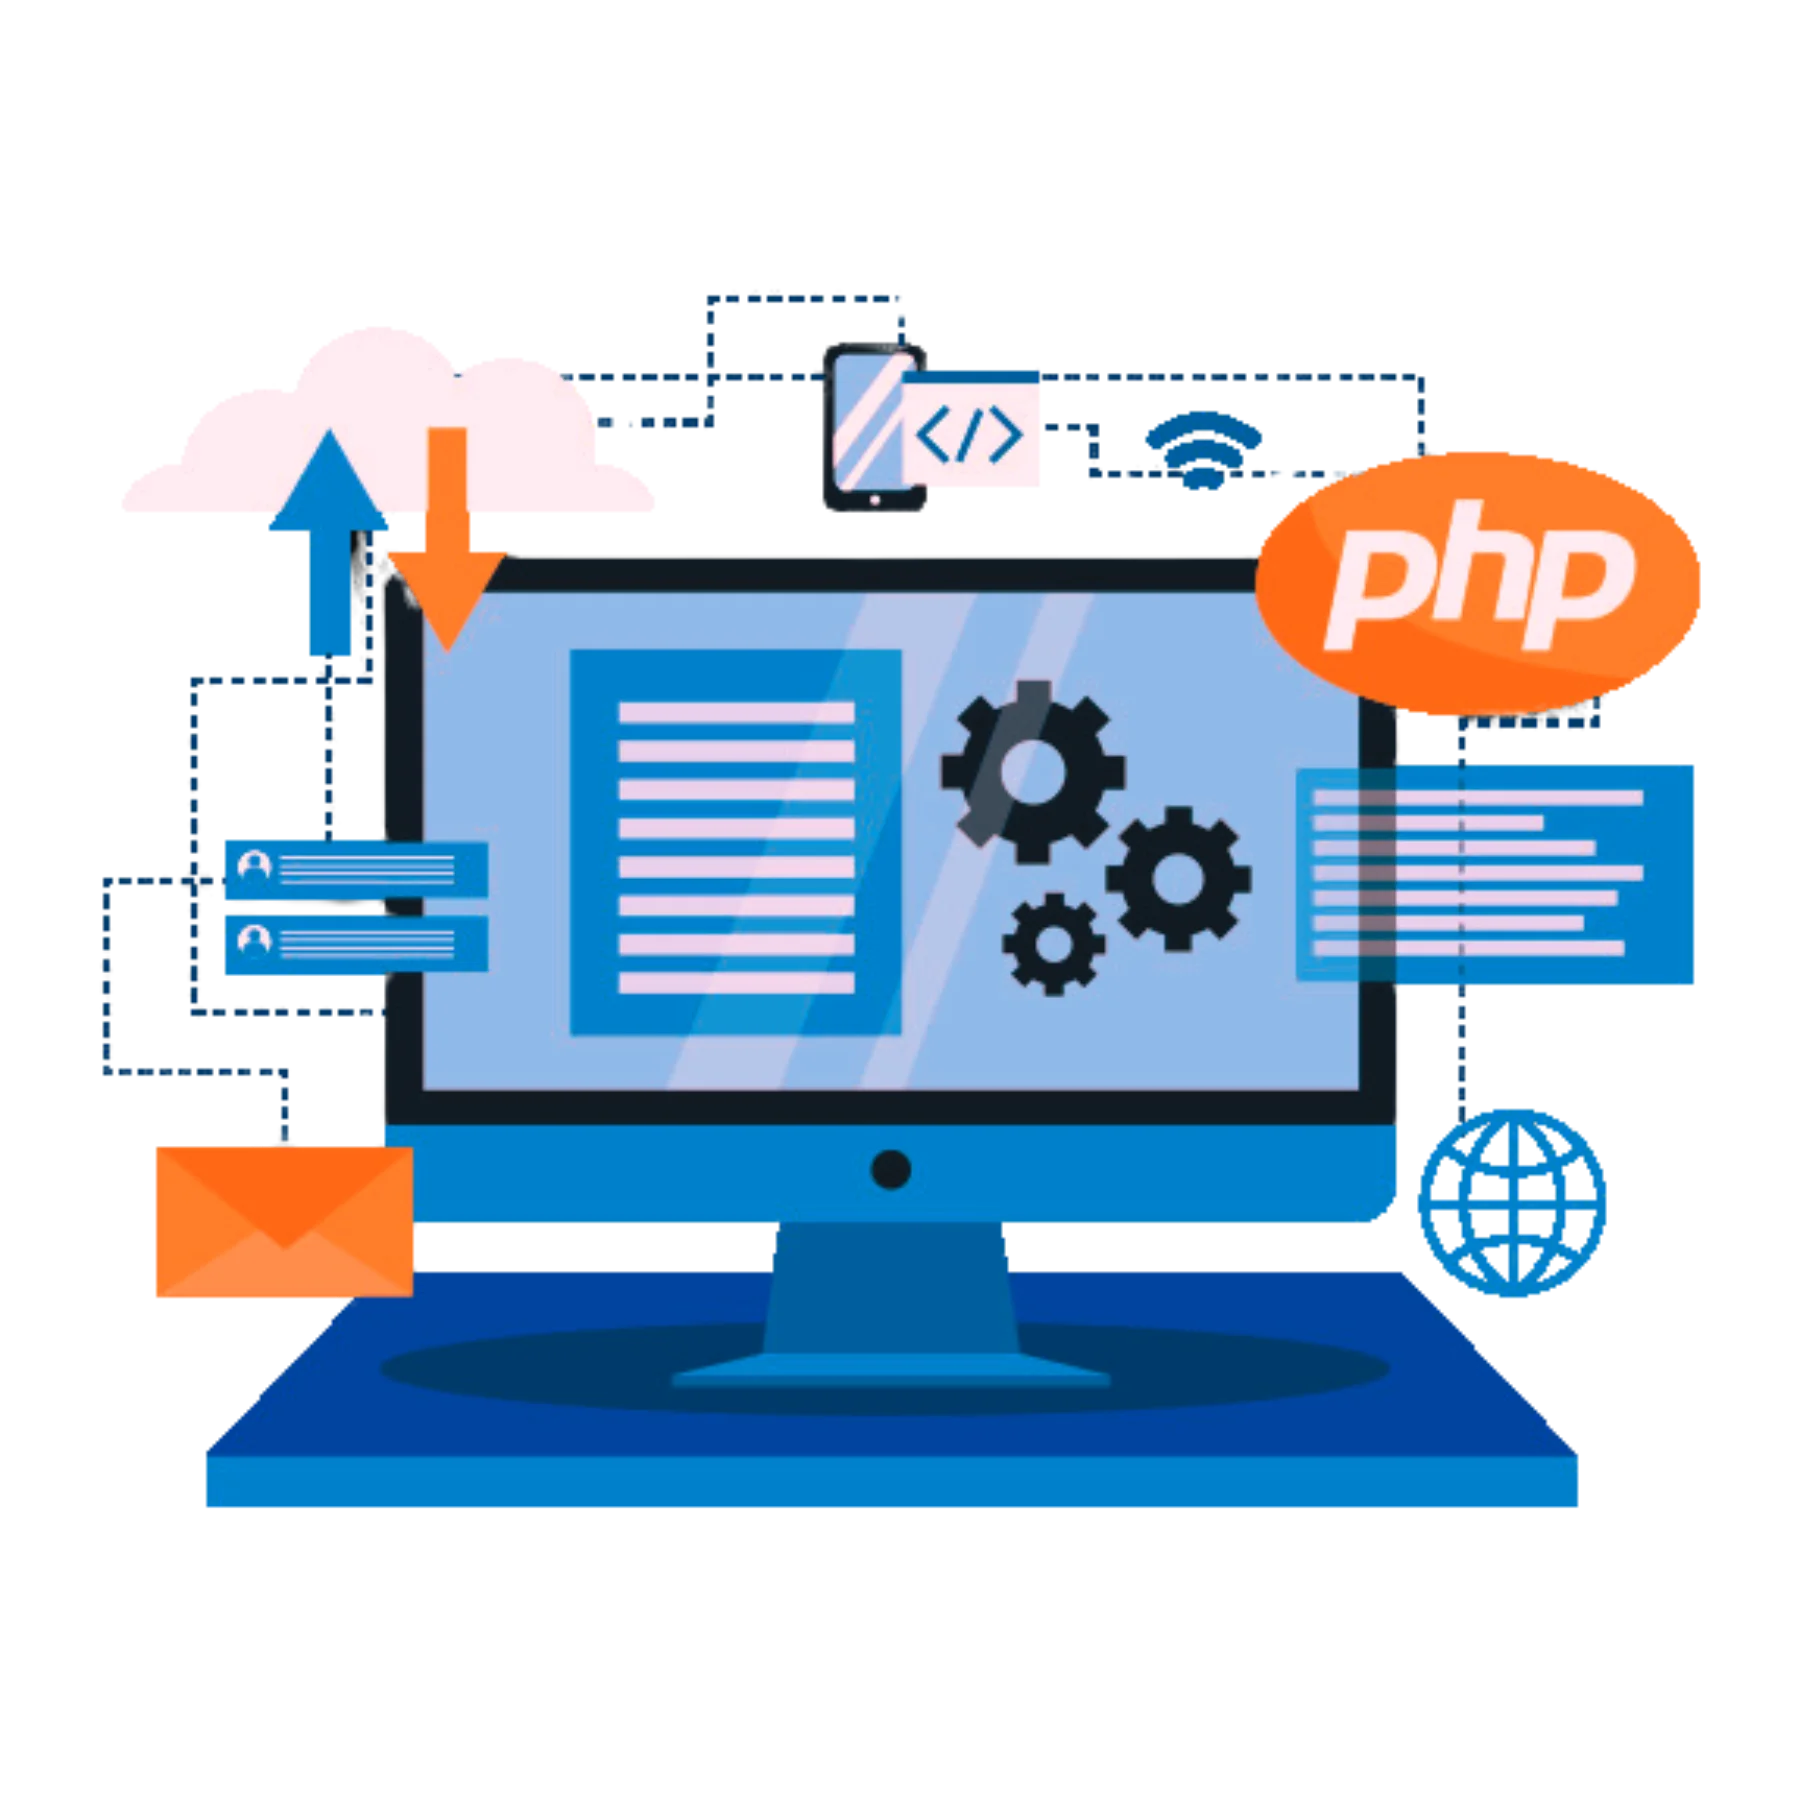 A leading PHP development company delivering innovative web solutions tailored to your business needs, leveraging expertise and cutting-edge technologies to drive digital success.